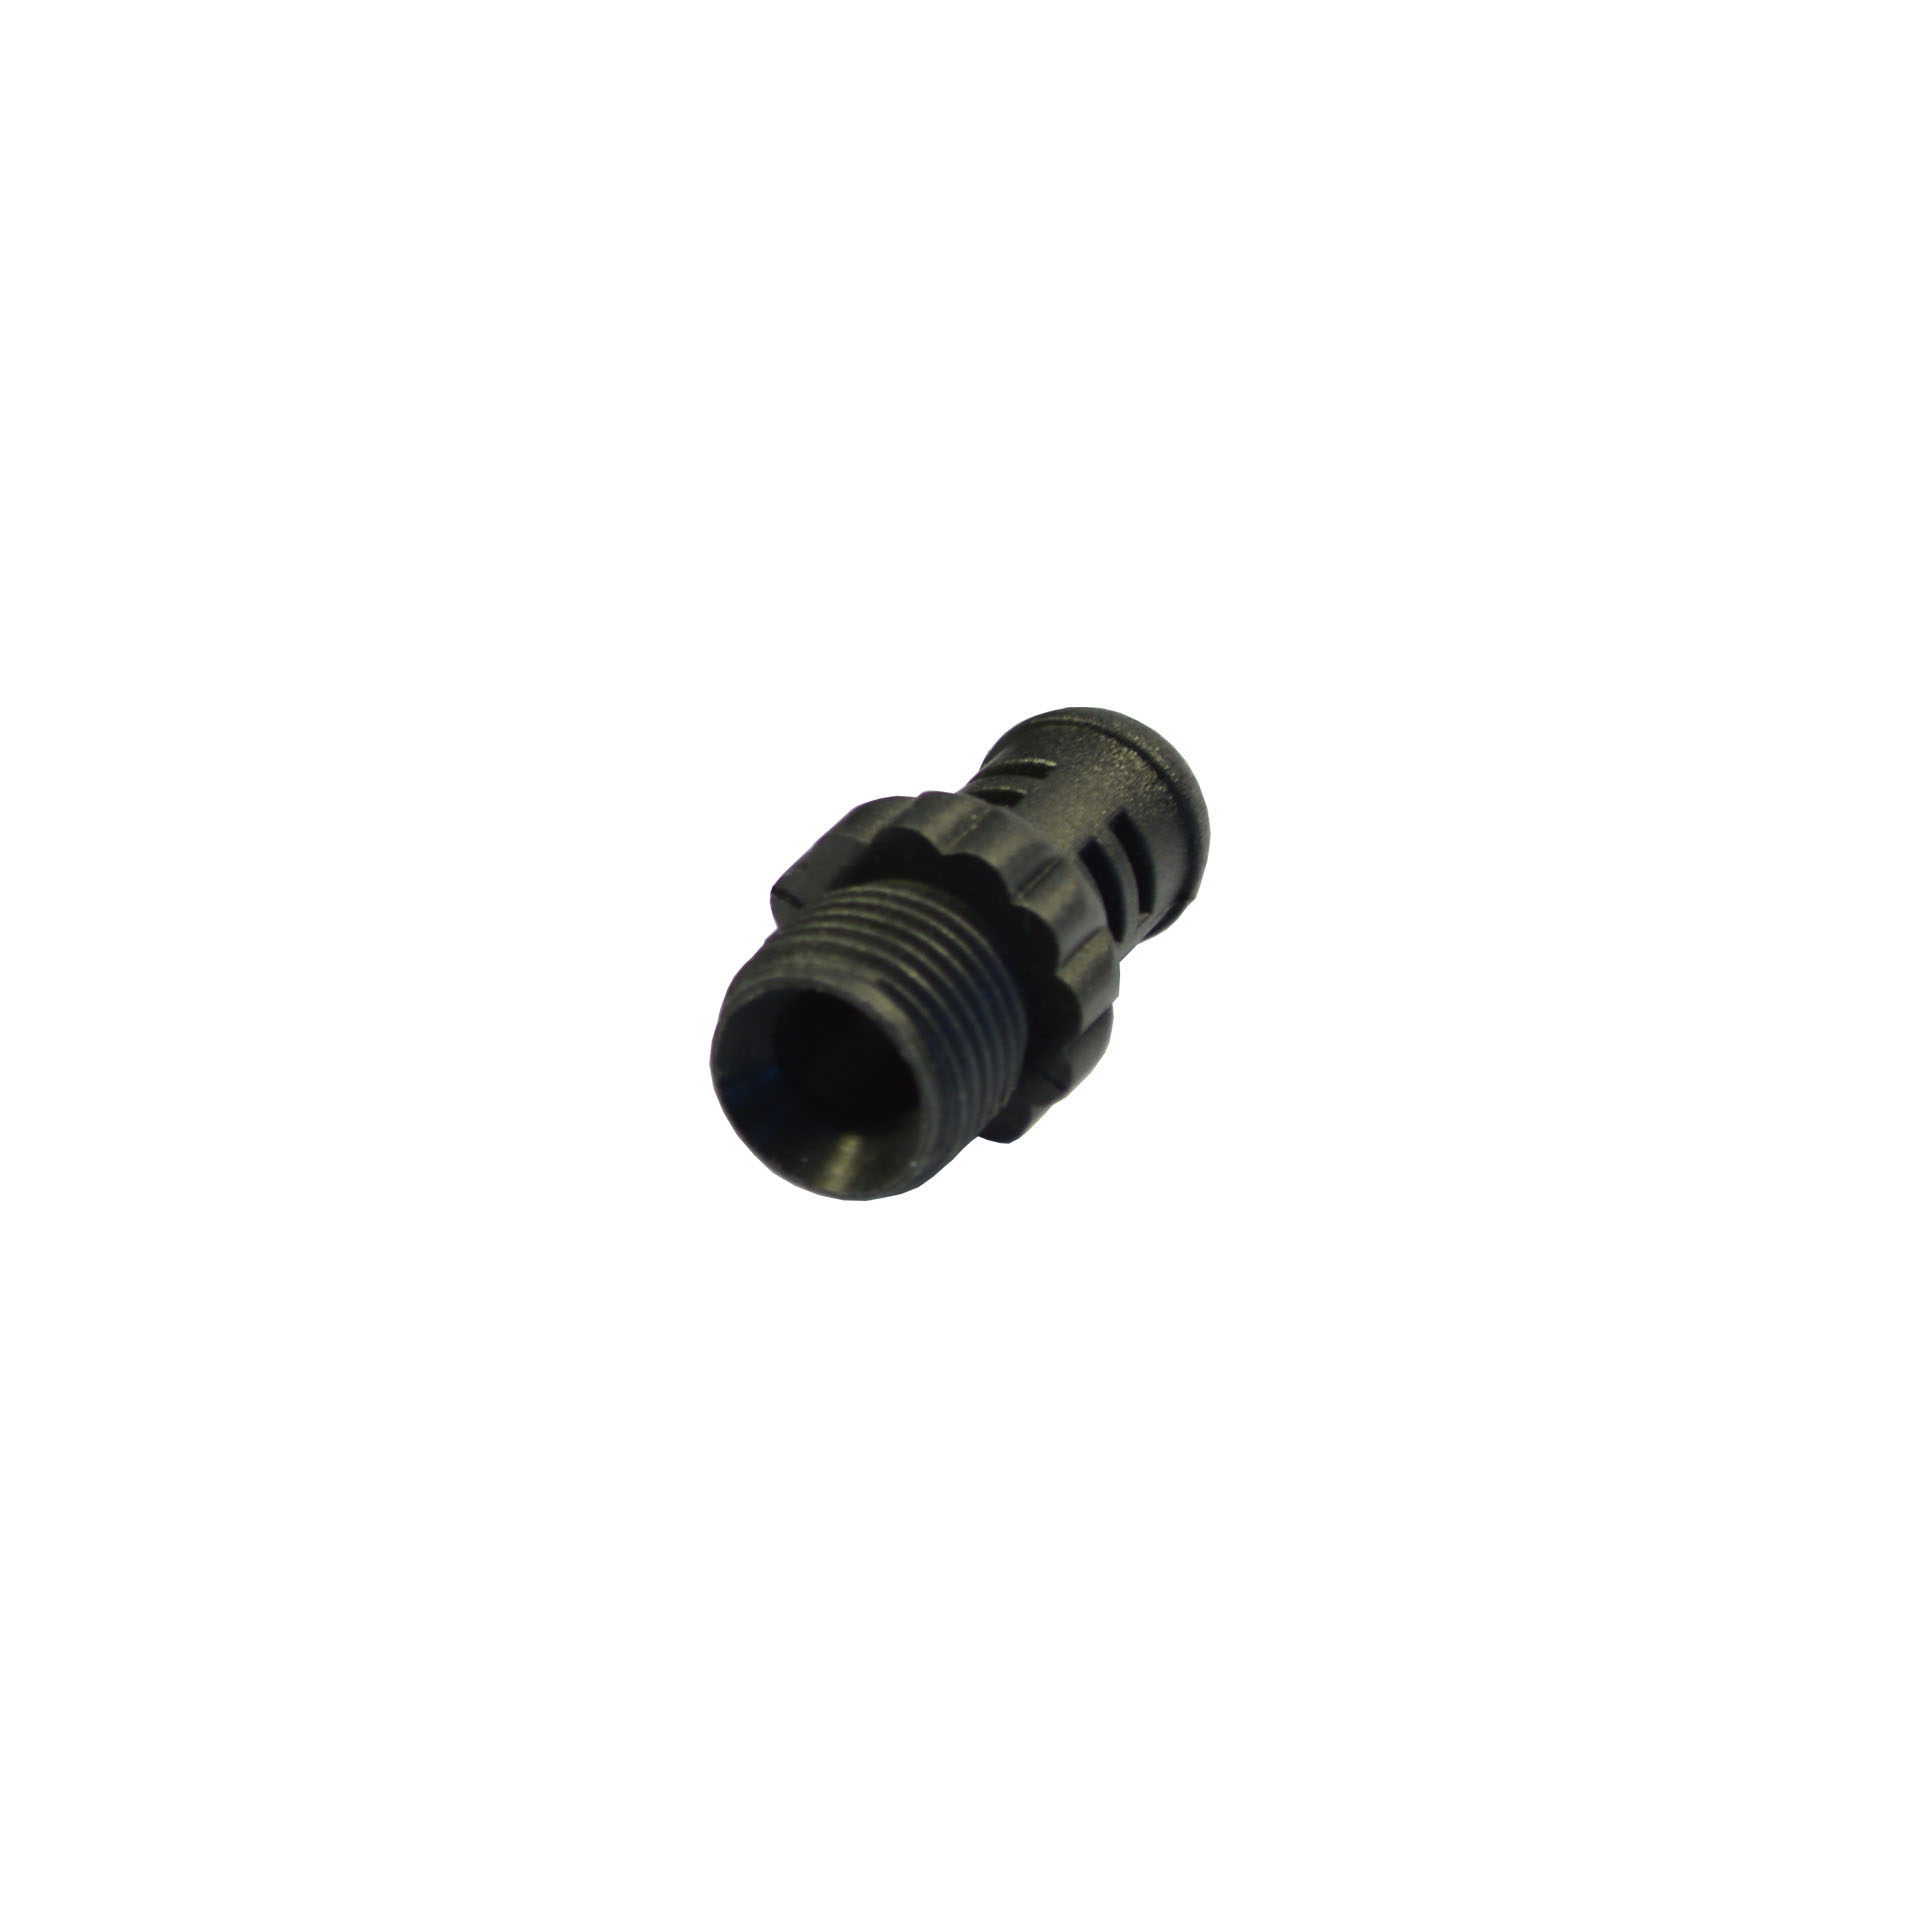 Black cable screw PG7 accessory clip junction.